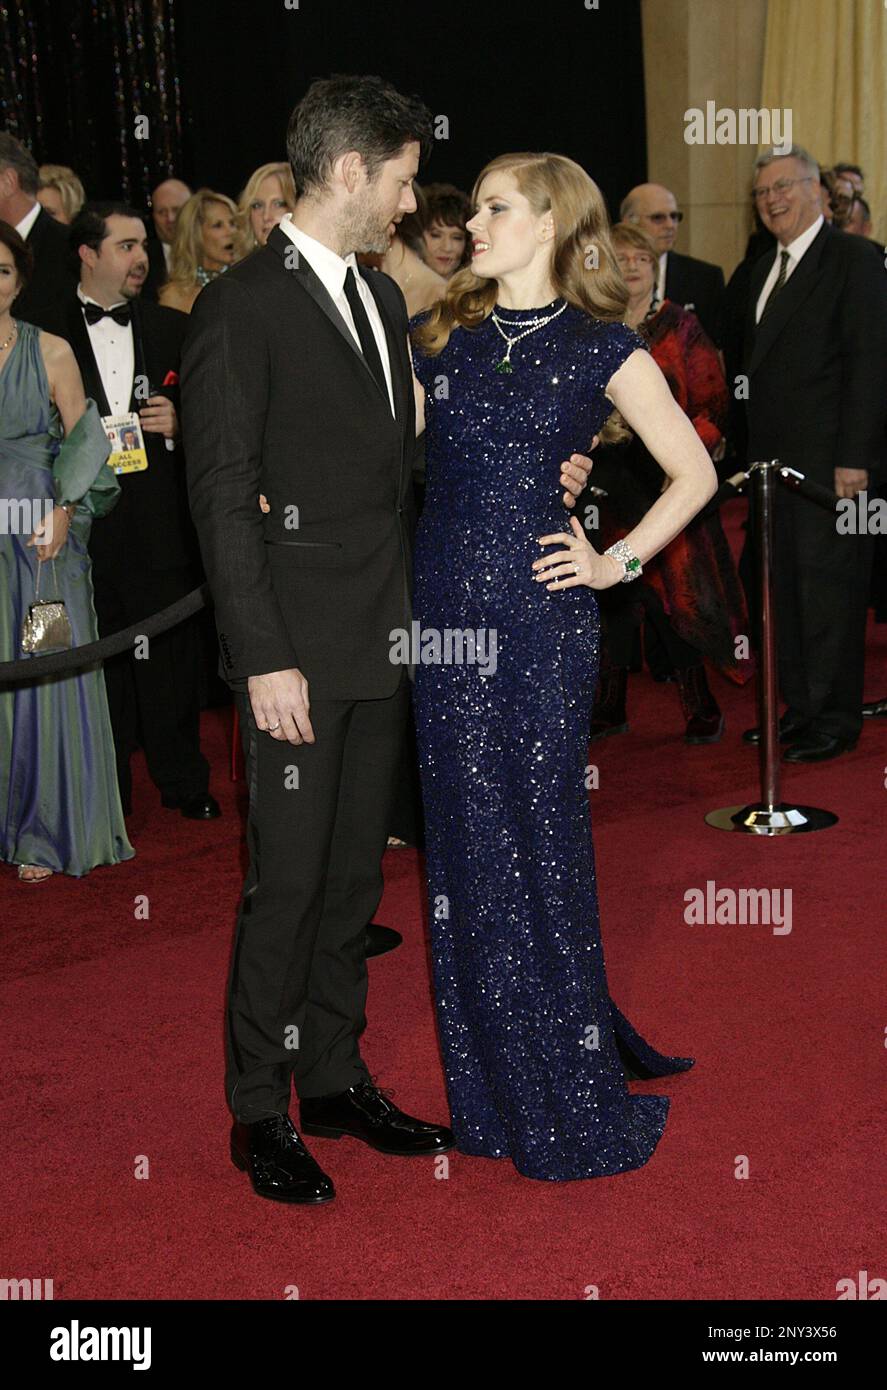 Darren Le Gallo and Amy Adams arrive at the 83rd Annual Academy Awards held at the Kodak Theatre on February 27, 2011 in Hollywood, California. Photo by Francis Specker Stock Photo